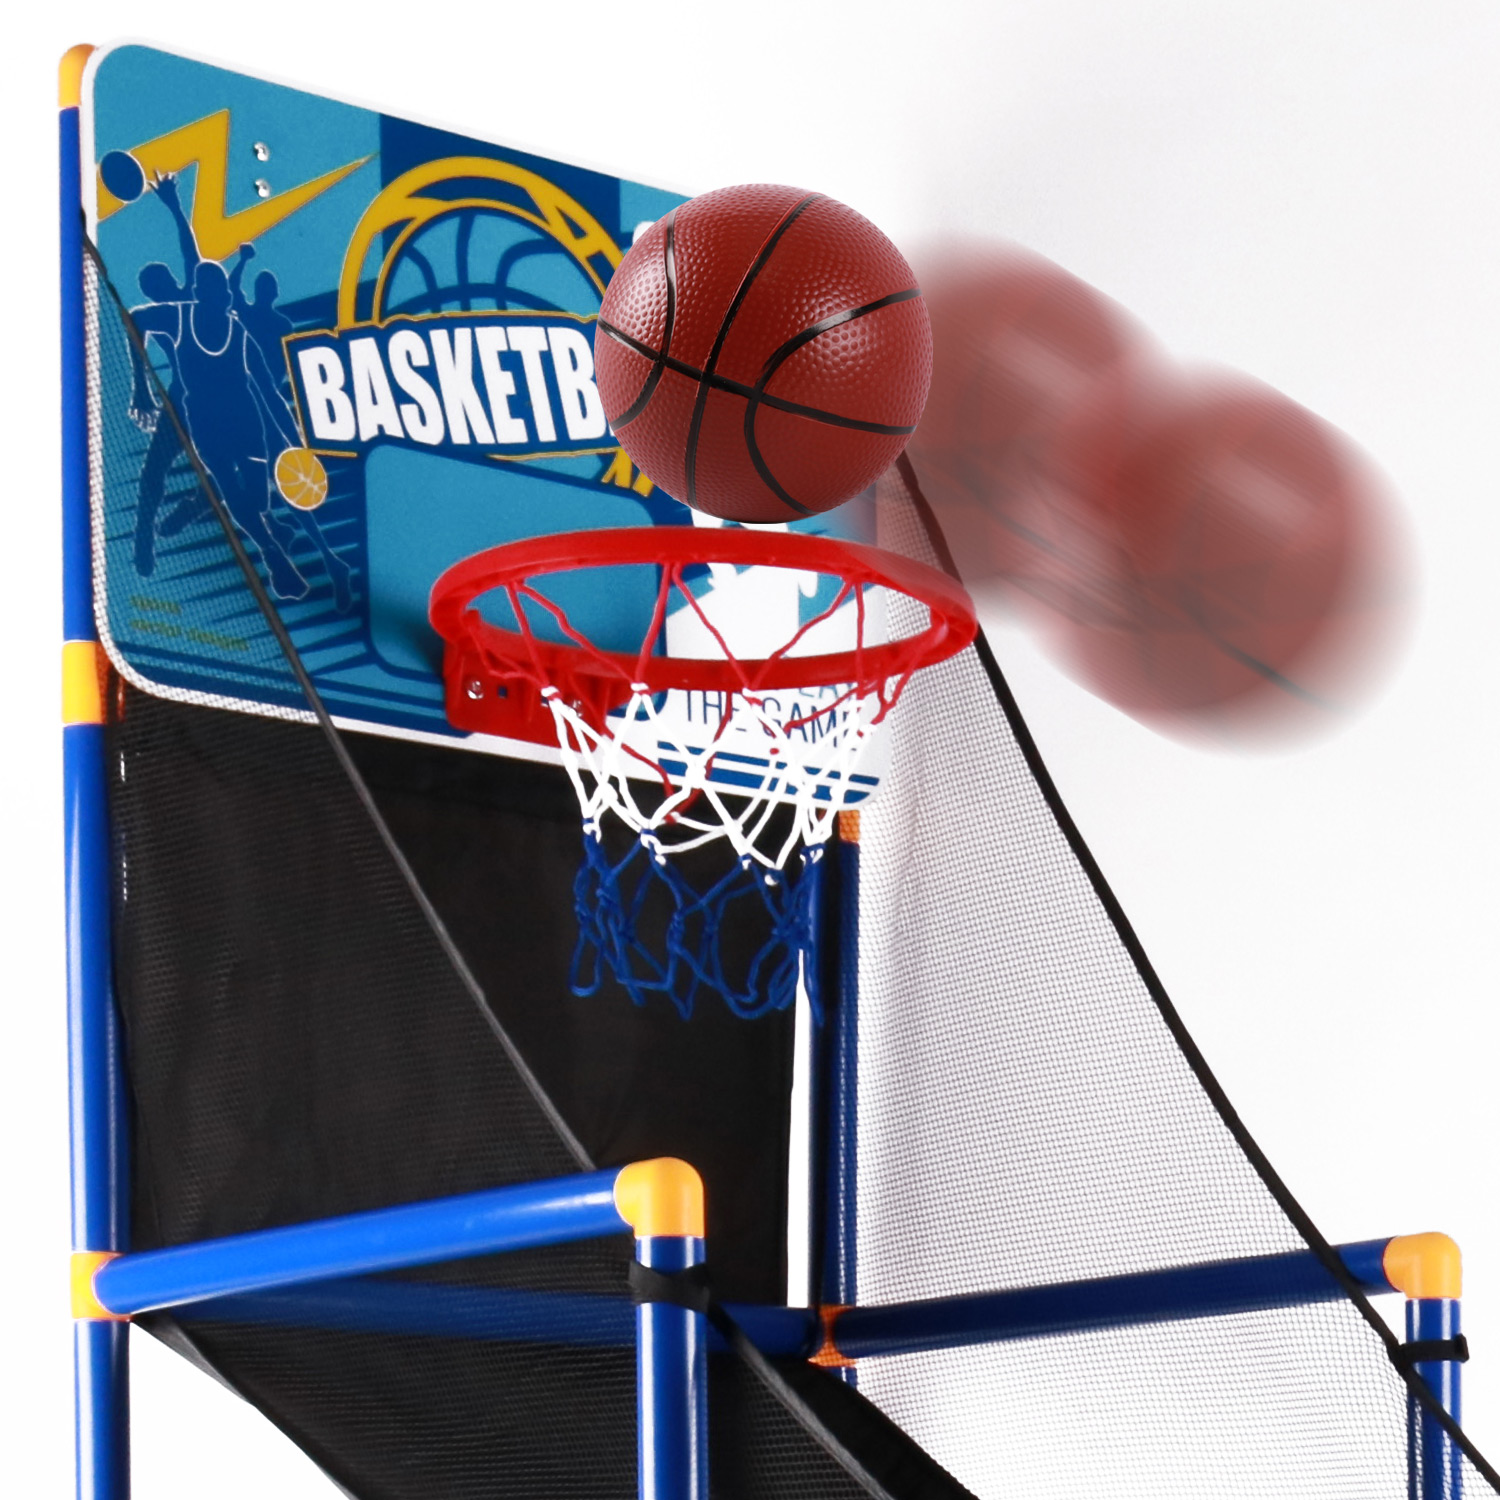 Vokodo Kids Home Basketball Court Shooting Game Includes 2 Balls Air Pump And Slide Ramp Great For Indoor Arcade Practice Improves Scoring Accuracy Sports Toys Active Play Gift For Children Boys Girls 